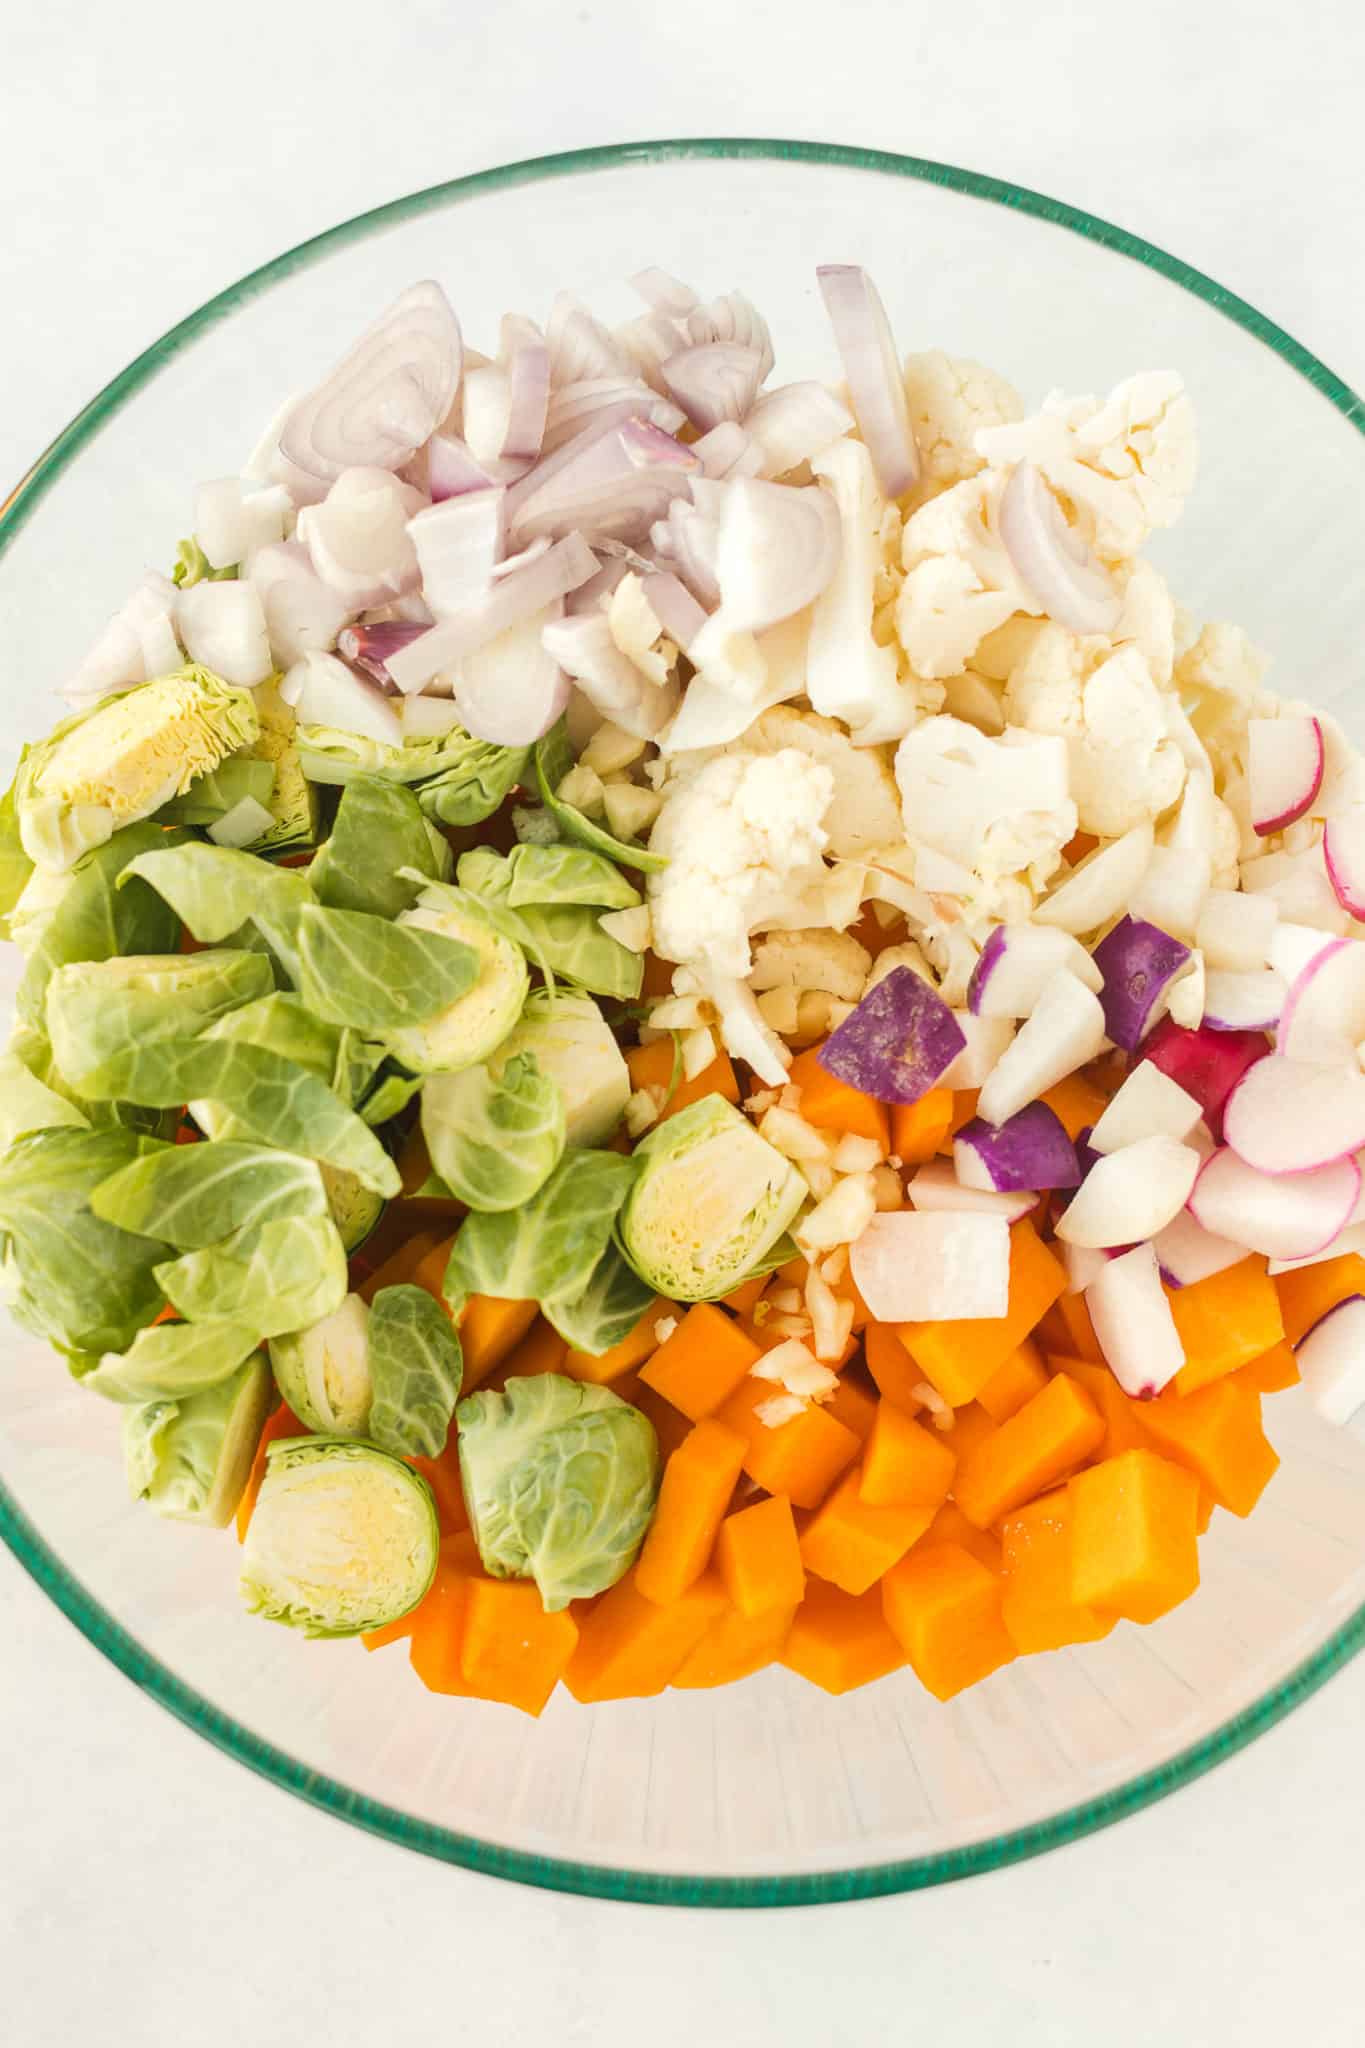 chopped vegetables in a mixing bowl for veggie bowl recipe.